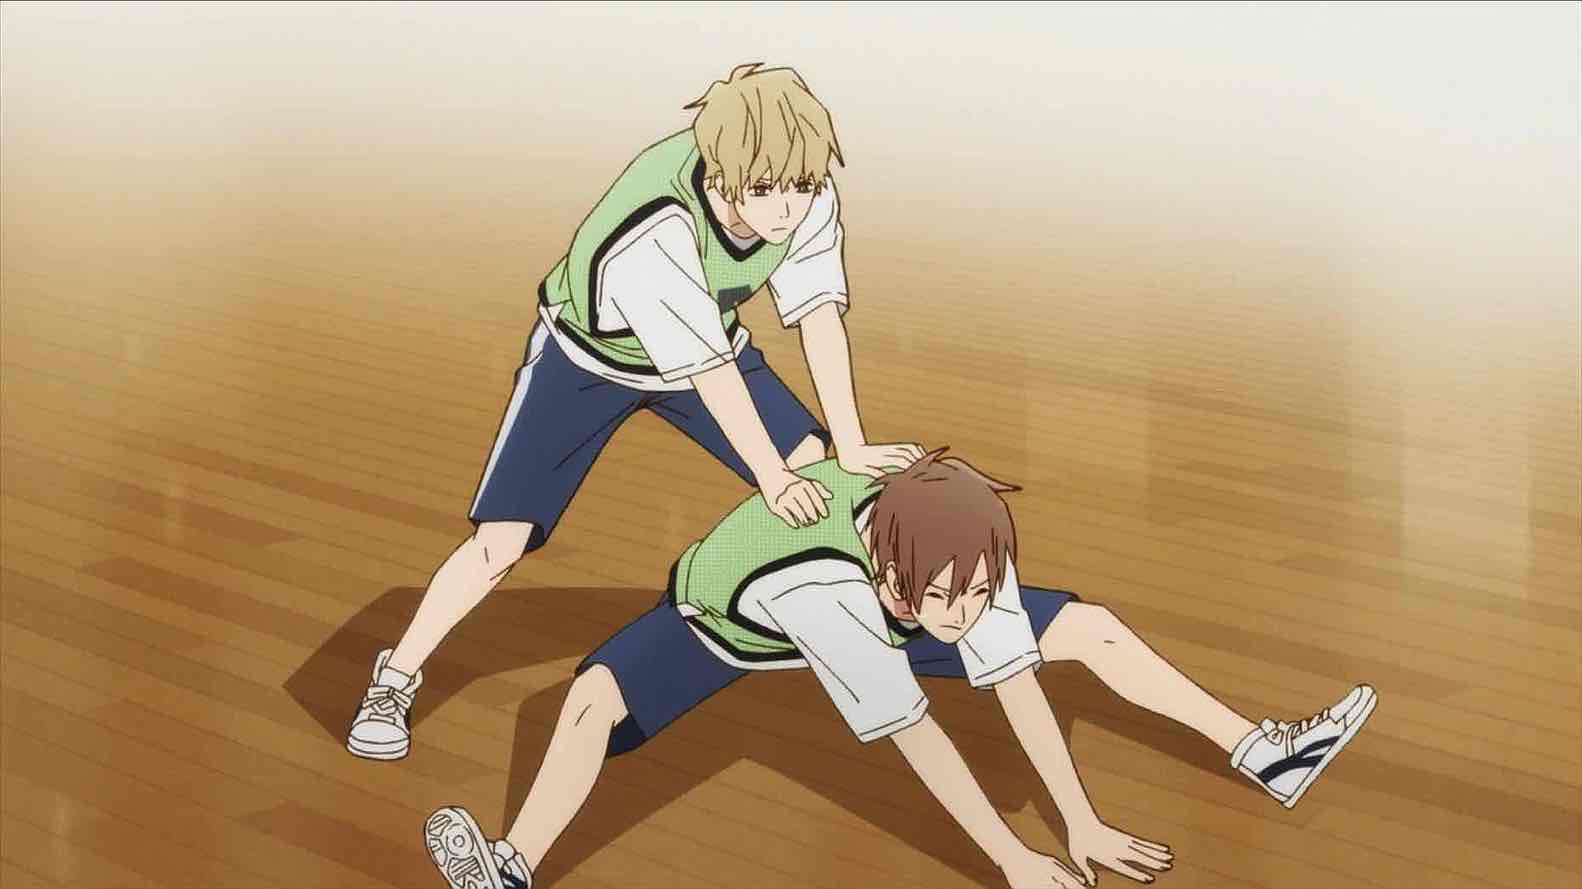 CGDCT? CBDCT! Cute boys doing clumsy things! 😵‍💫 ◇ See the full review  for Cool Doji Danshi on MAL . . . . . #cooldojidanshi…